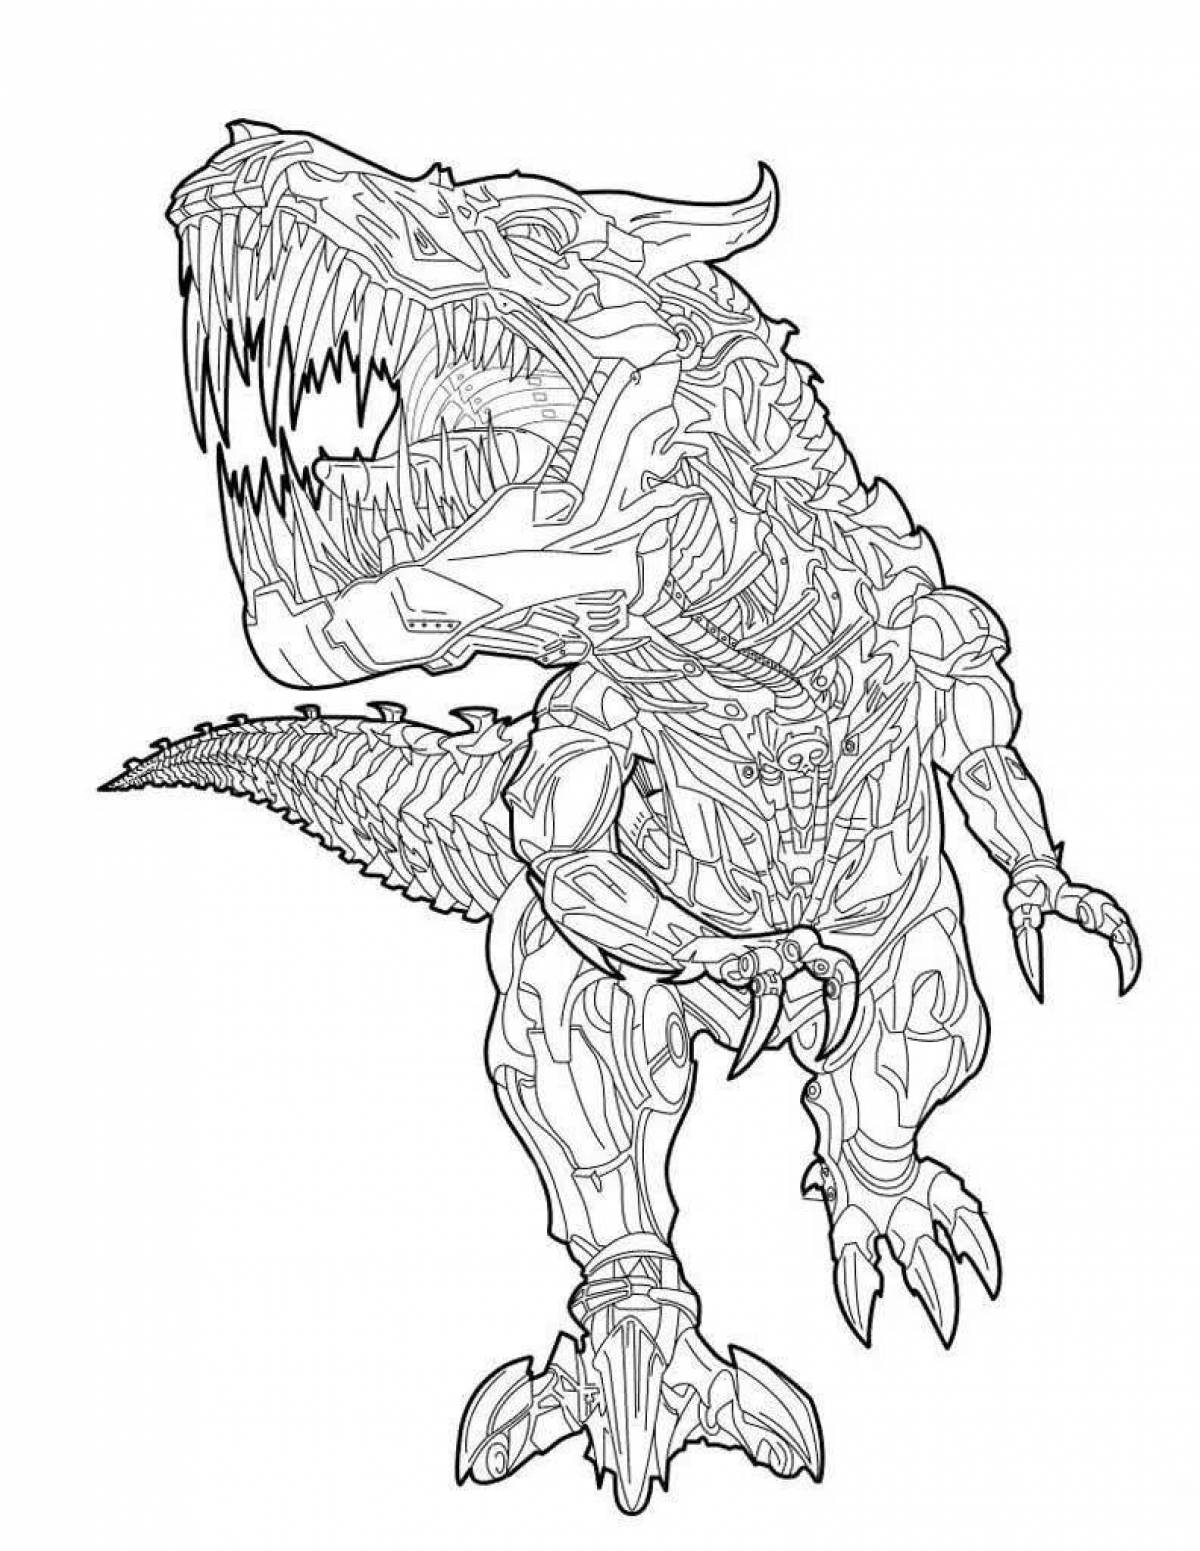 Amazing robot dinosaur coloring page